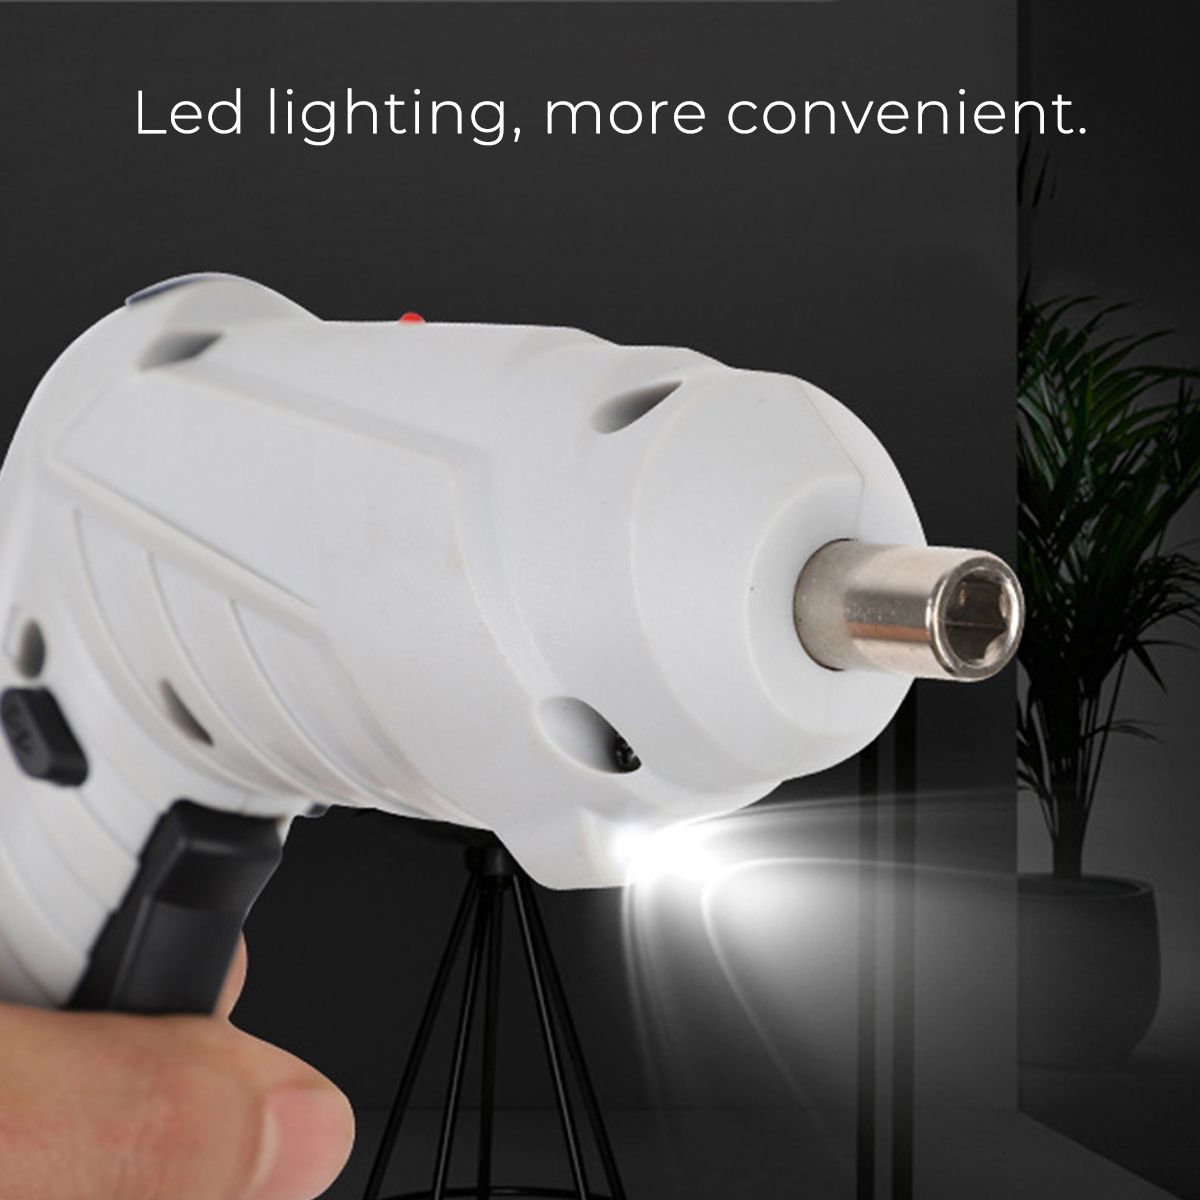 Wireless-Electric-Screwdriver-USB-Rechargeable-Rotating-Multi-grip-Mode-Electric-Drill-Tool-with-LED-1638254